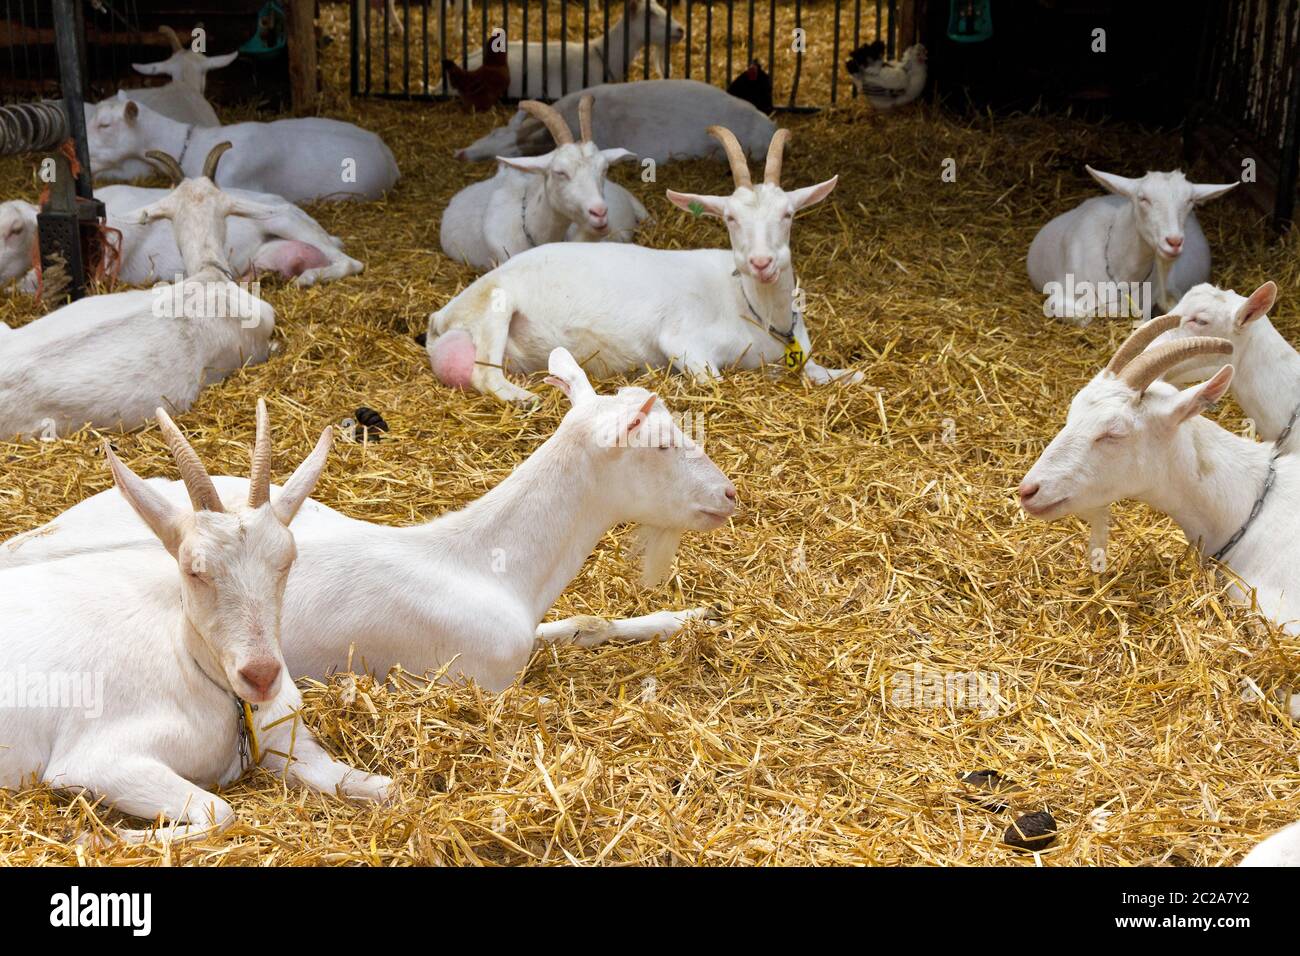 Dutch breed goats in straw at a petting zoo in the Netherlands Stock Photo